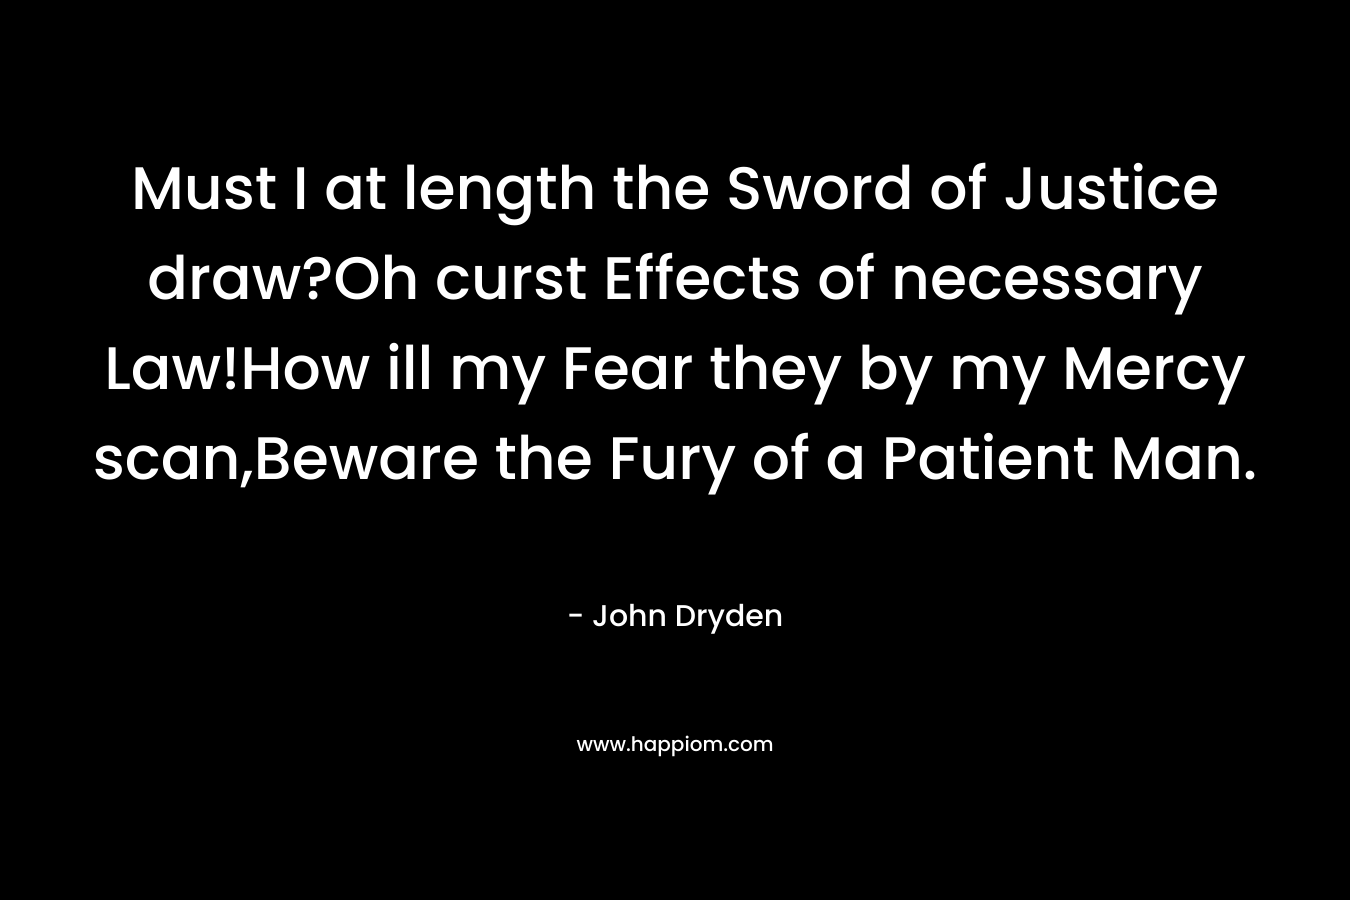 Must I at length the Sword of Justice draw?Oh curst Effects of necessary Law!How ill my Fear they by my Mercy scan,Beware the Fury of a Patient Man. – John Dryden